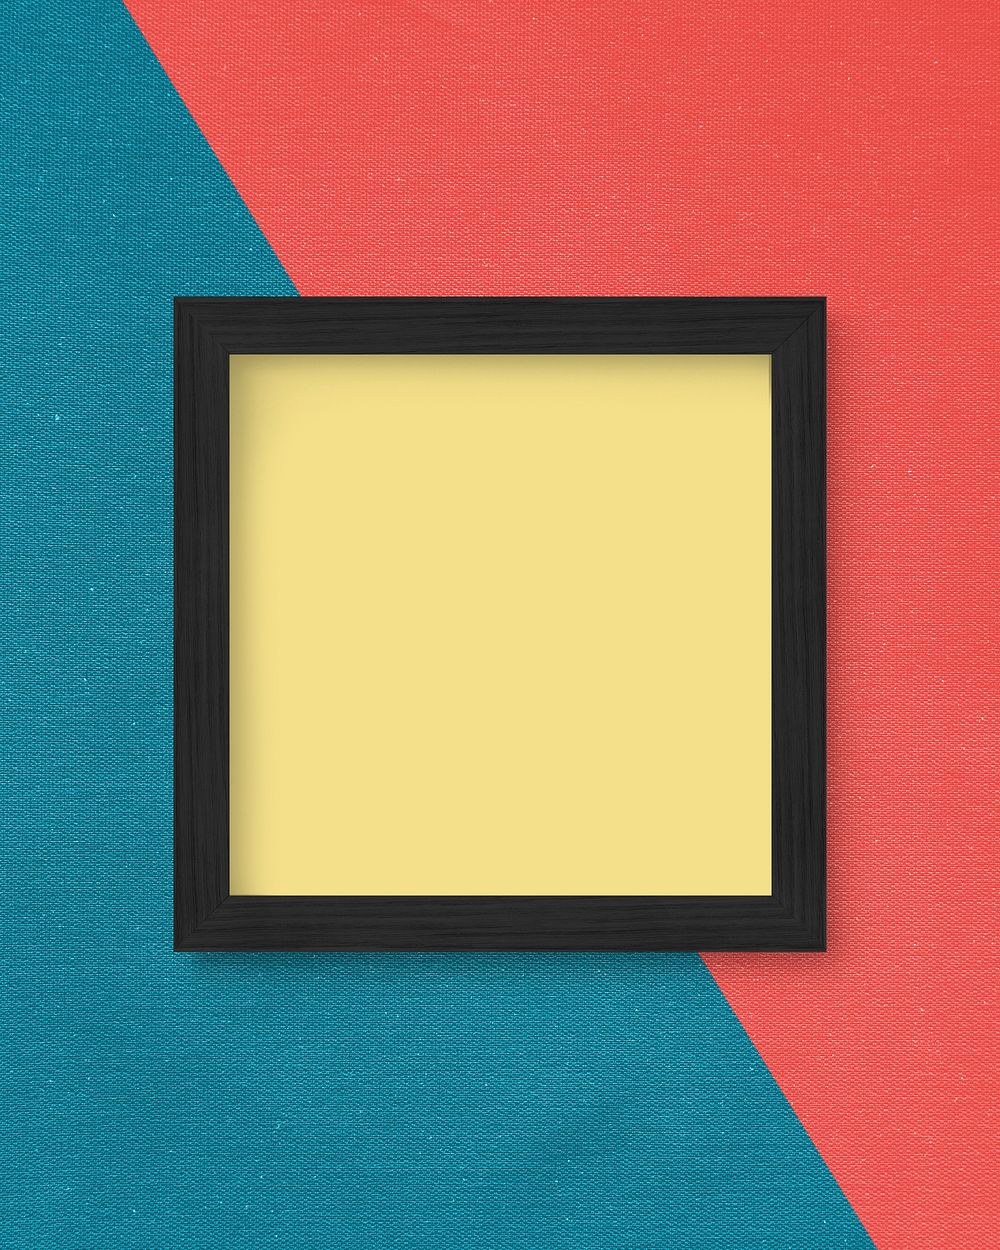 Blank frame mockup on a textured wall